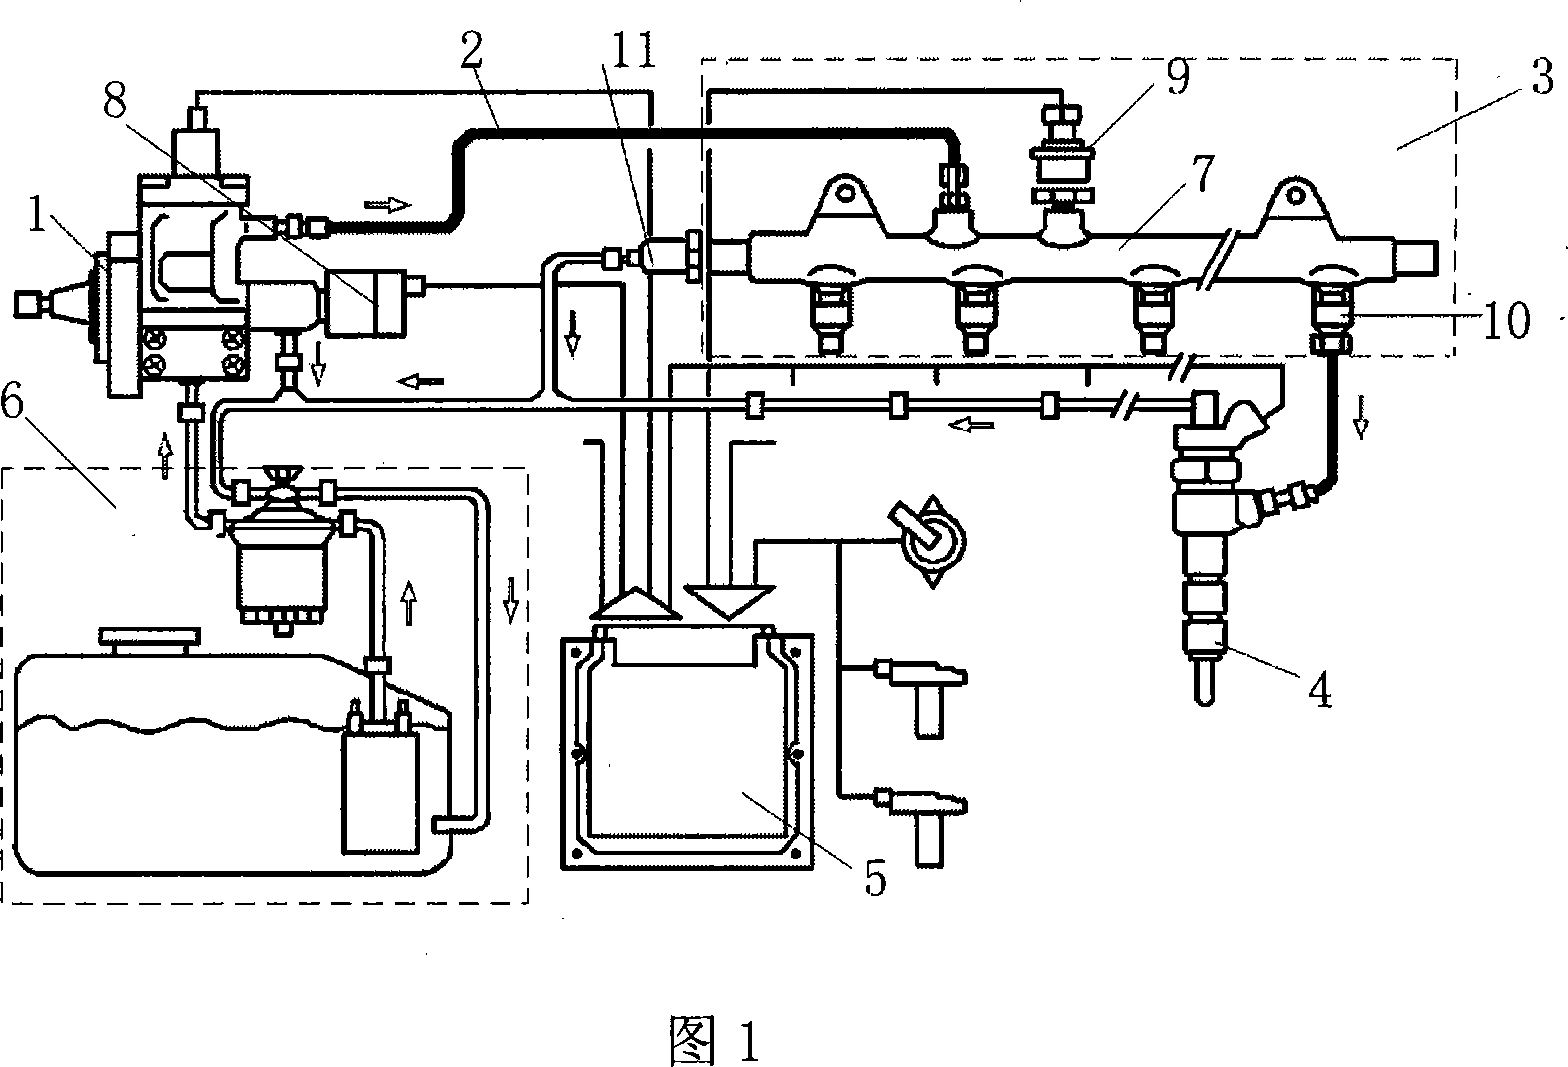 High pressure co-rail electric control fuel injection system